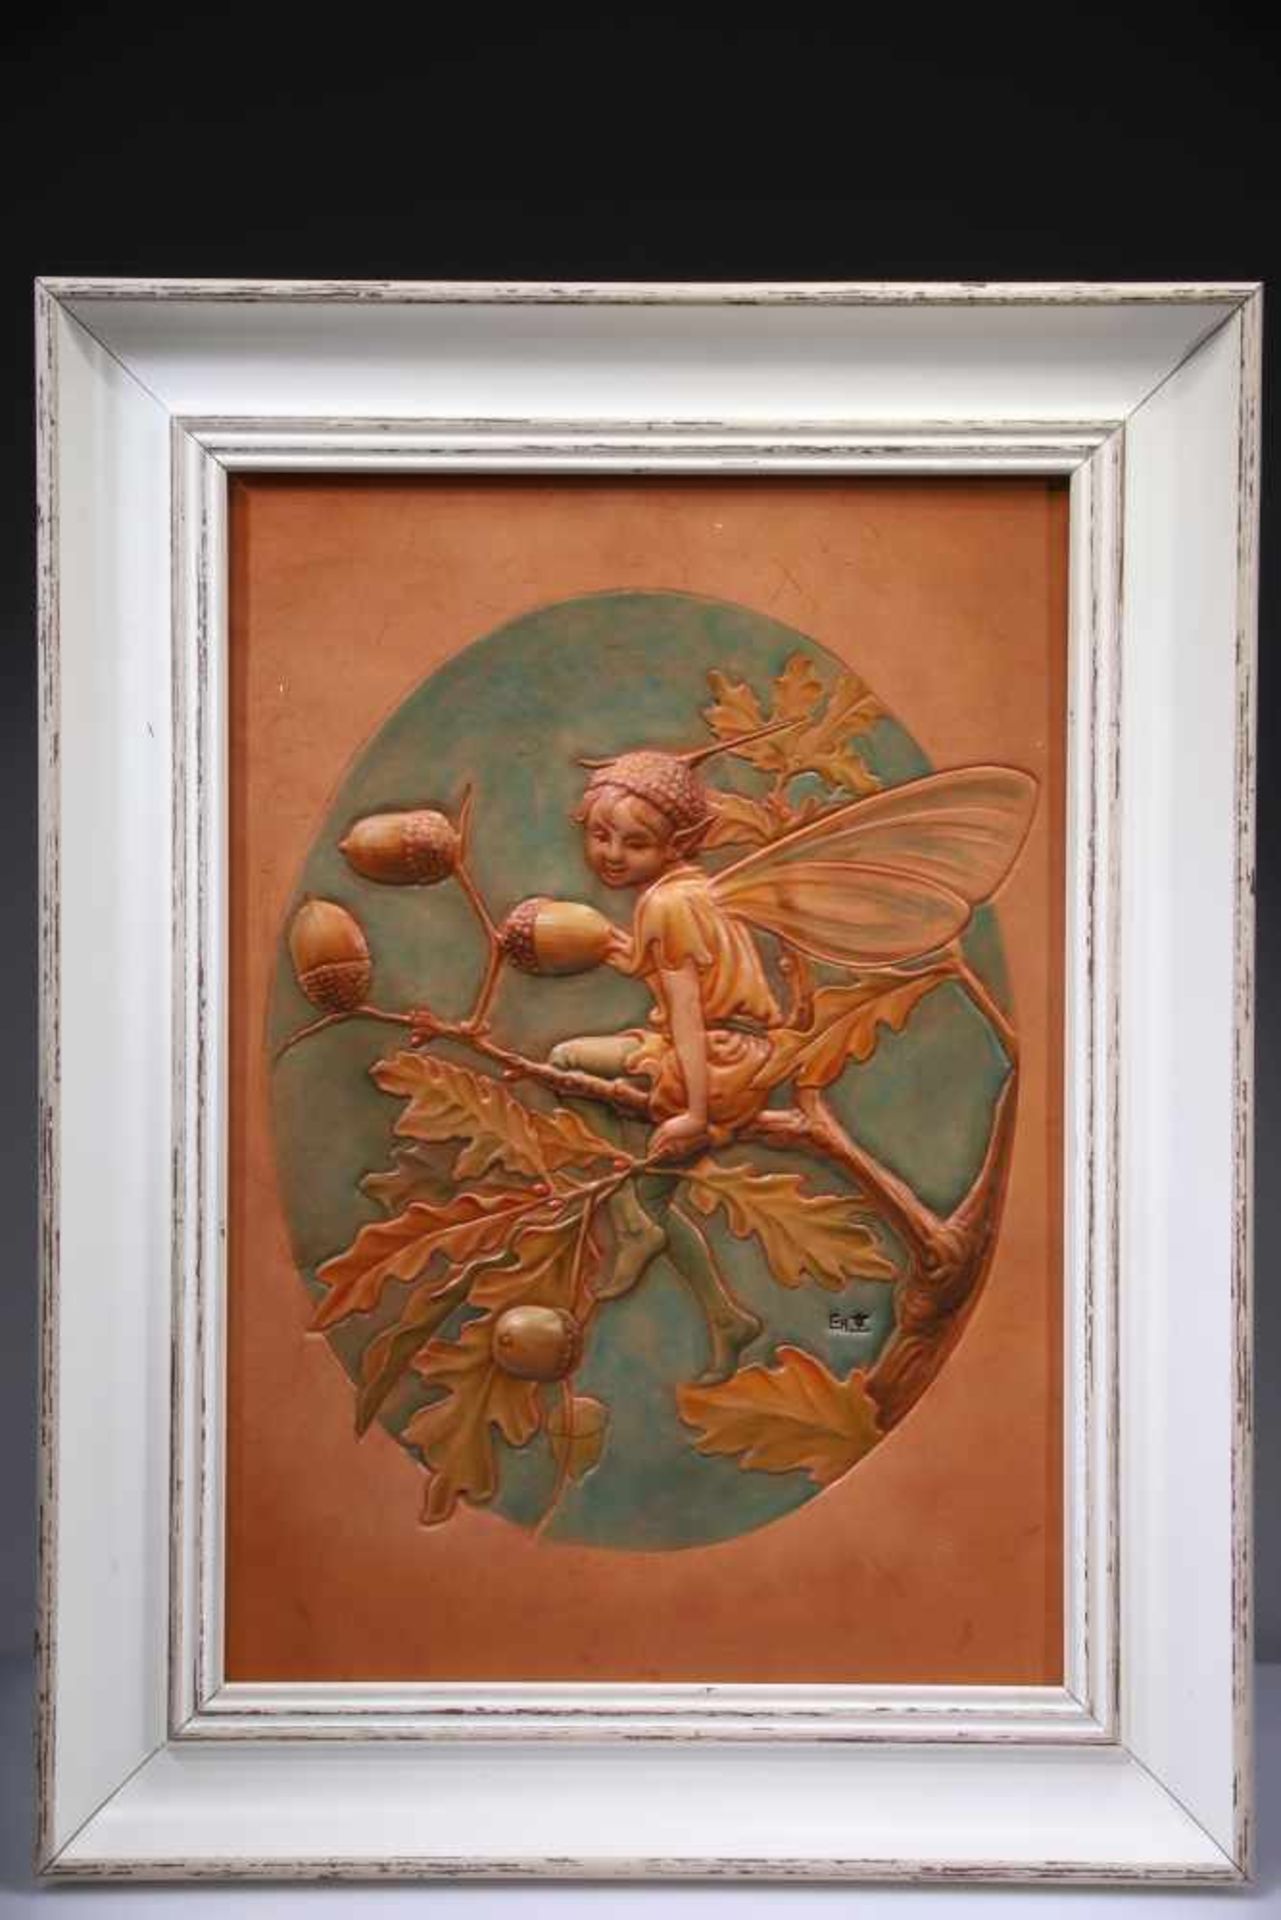 A FRAMED LEATHER CARVING